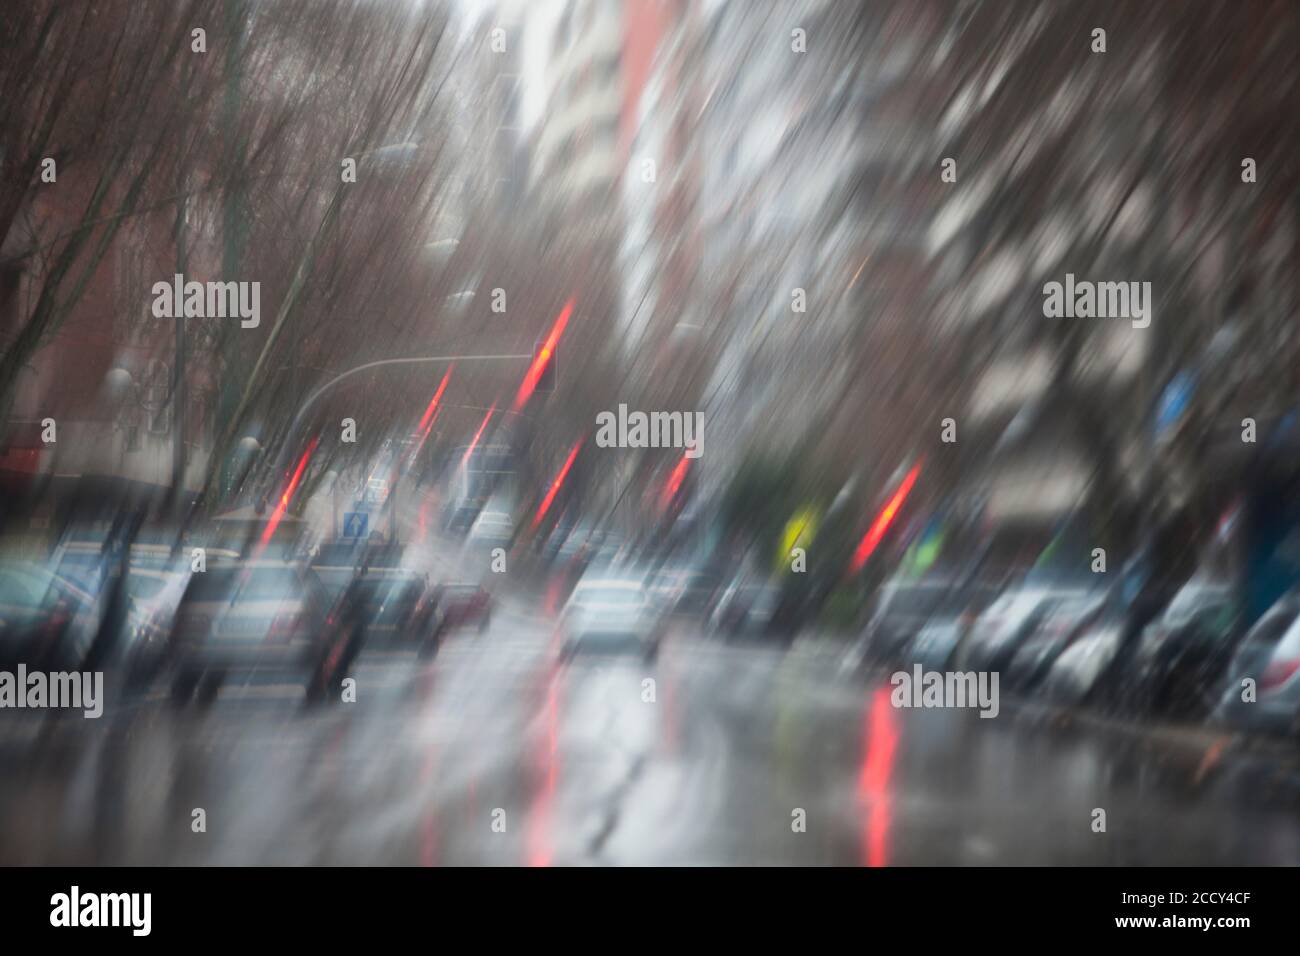 A blurry image of the street with cars and traffic lights taken from inside the car during a rainy day in Madrid Stock Photo